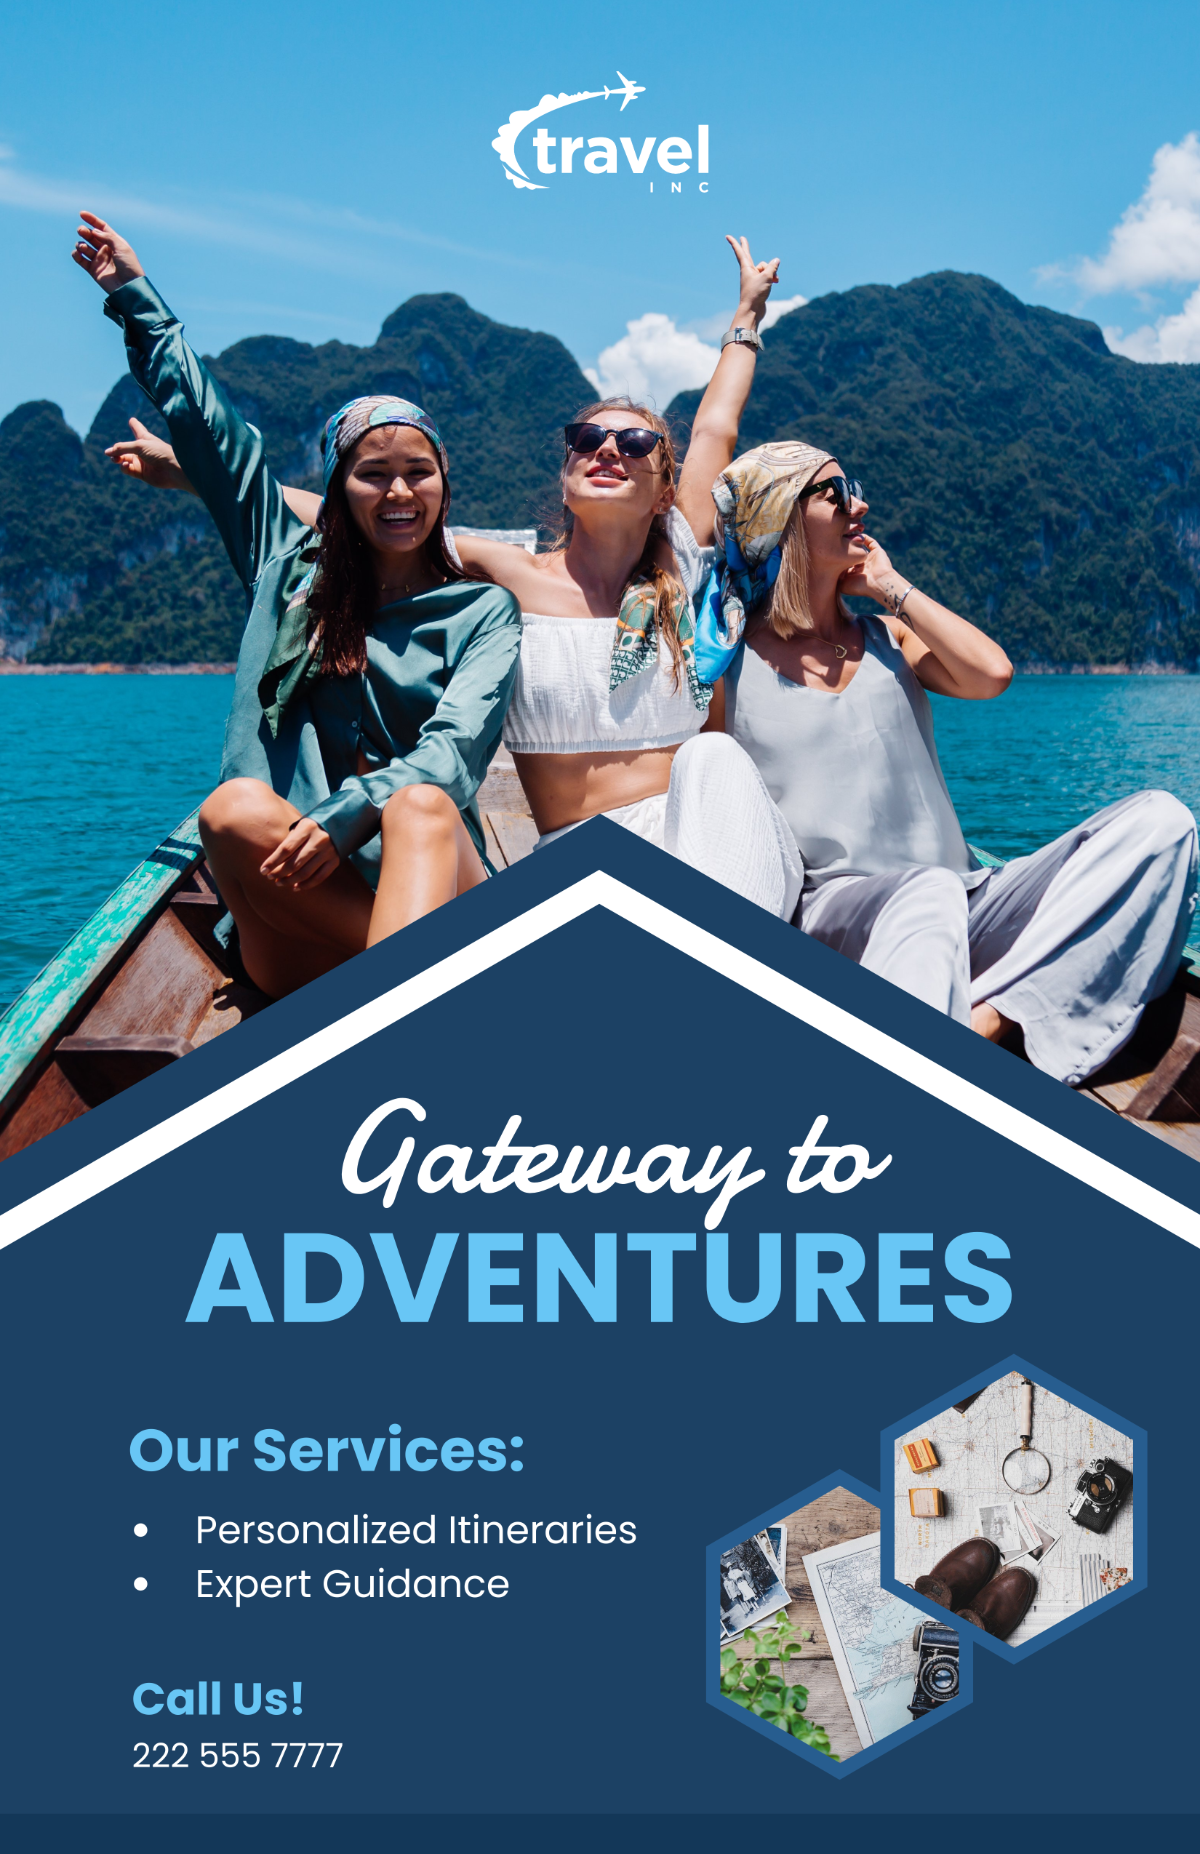 Travel Agency Business Poster